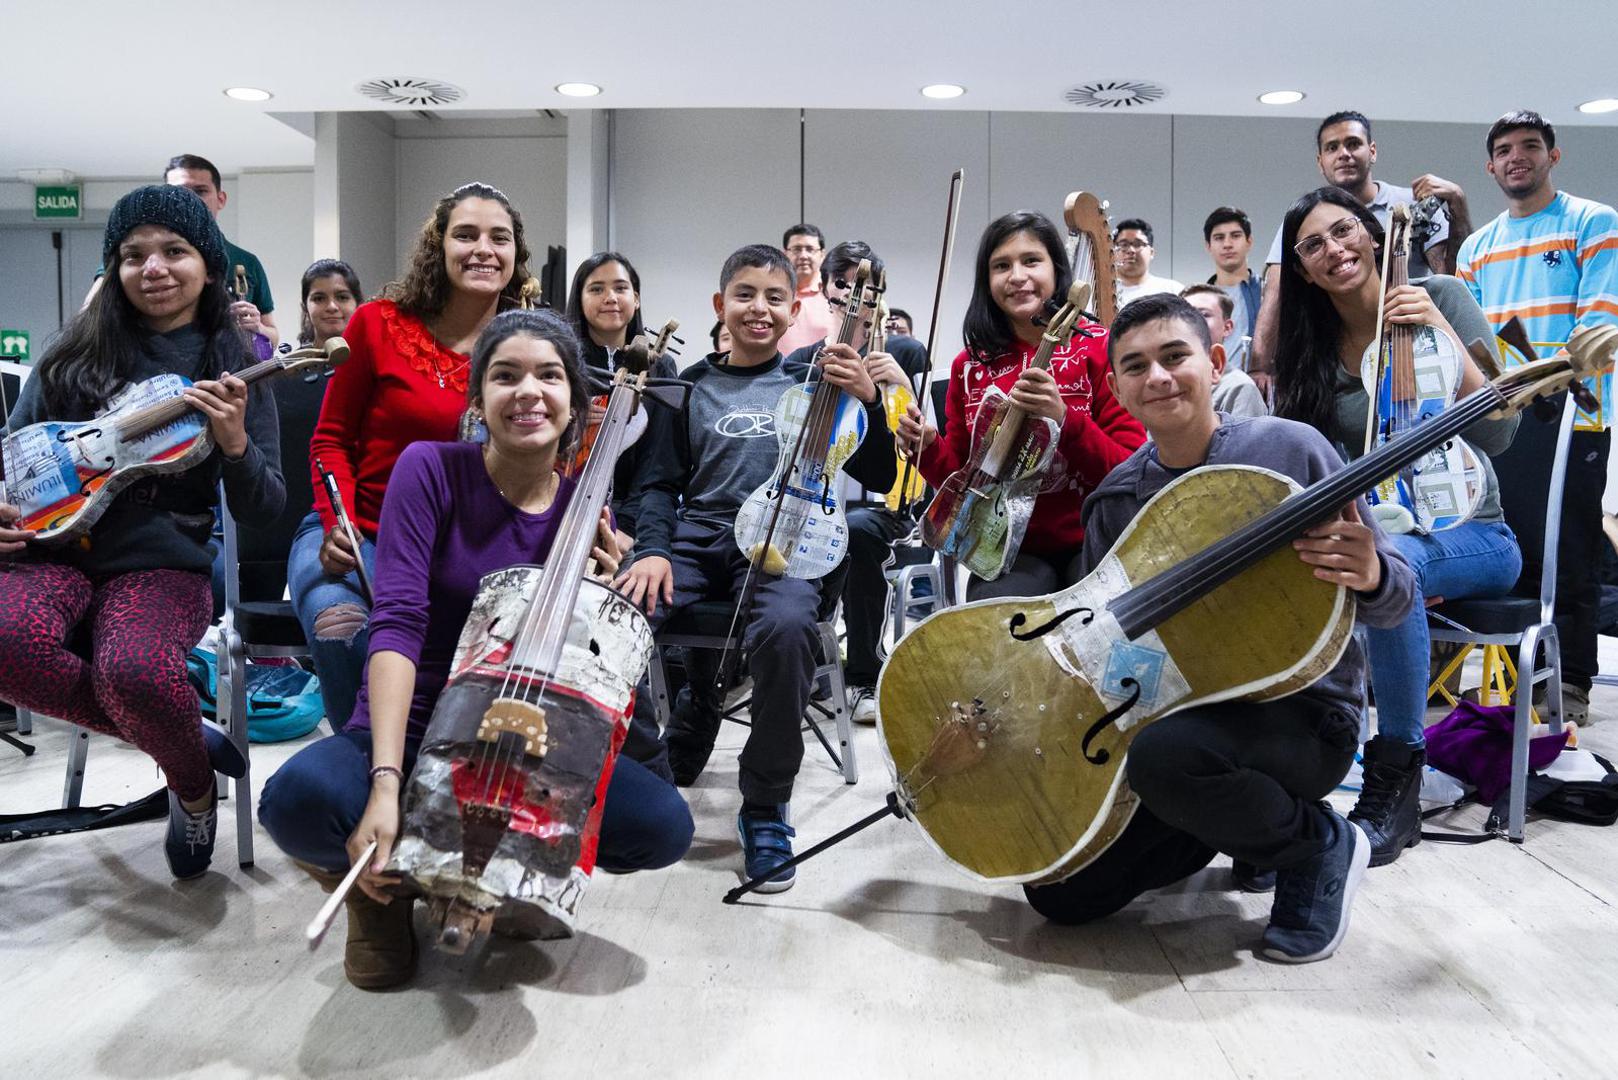 Orchestra of recycled instruments of Cateura "n"nThe orchestra of recycled instruments of Cateura in Madrid"n"nFeaturing: Atmosphere"nWhere: Madrid, Spain"nWhen: 02 Jan 2019"nCredit: Oscar Gonzalez/WENN.com OFA/ZOJ /WENN/PIXSELL